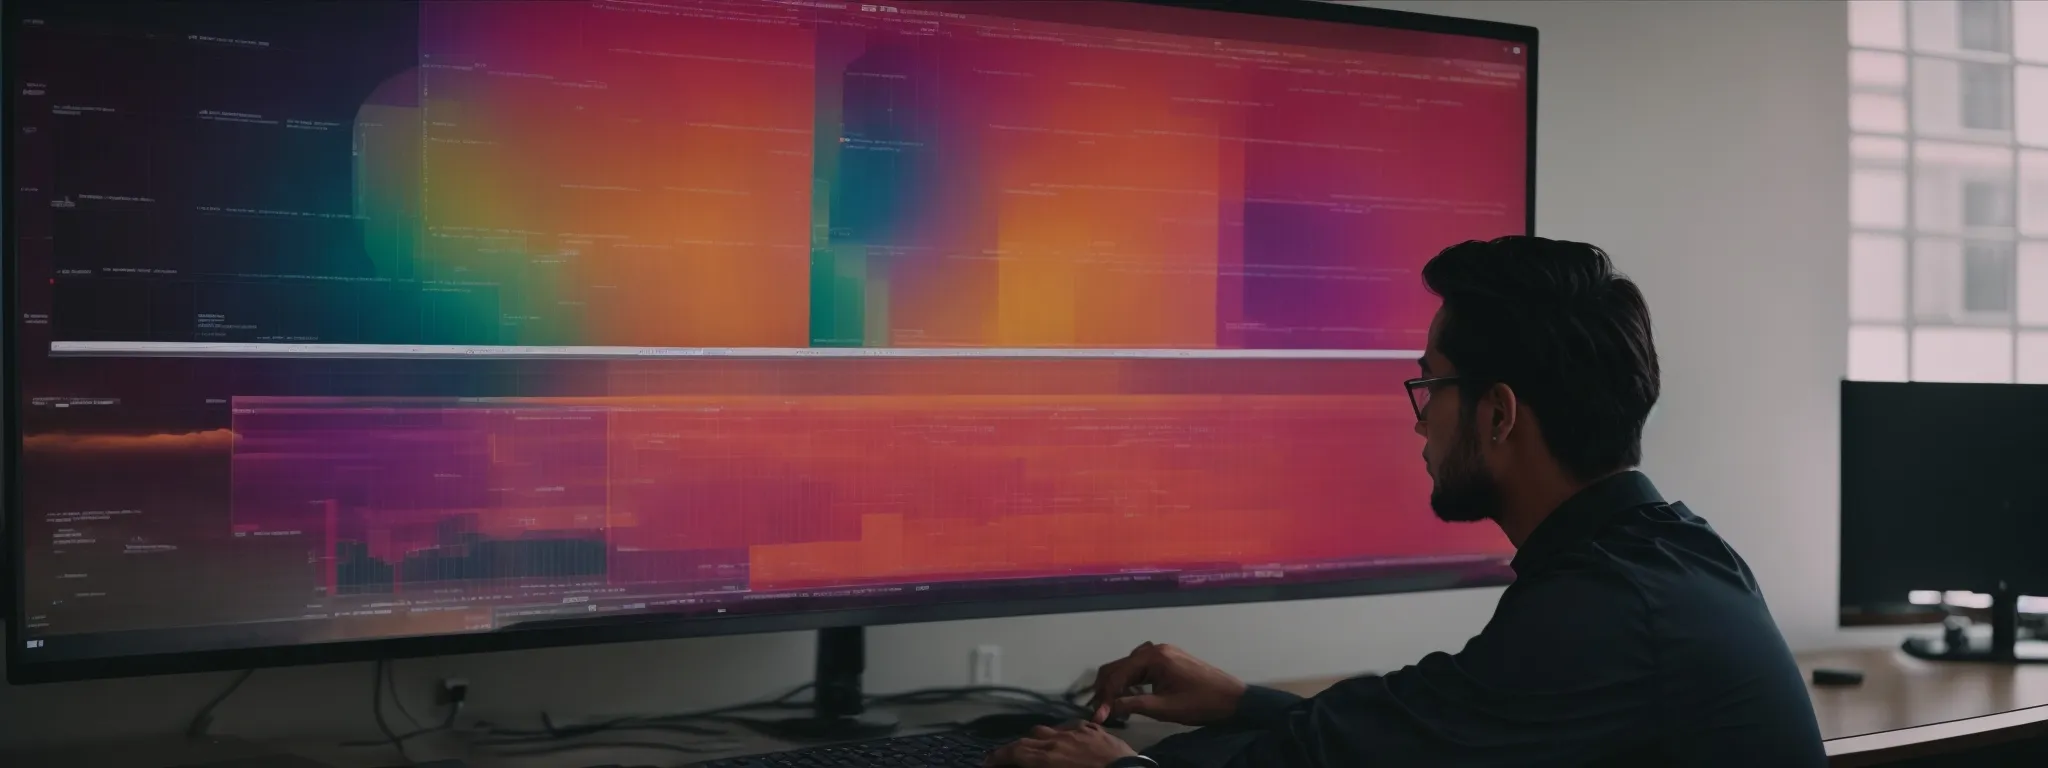 a digital marketer scrutinizes a computer screen displaying a colorful heatmap over a website layout.